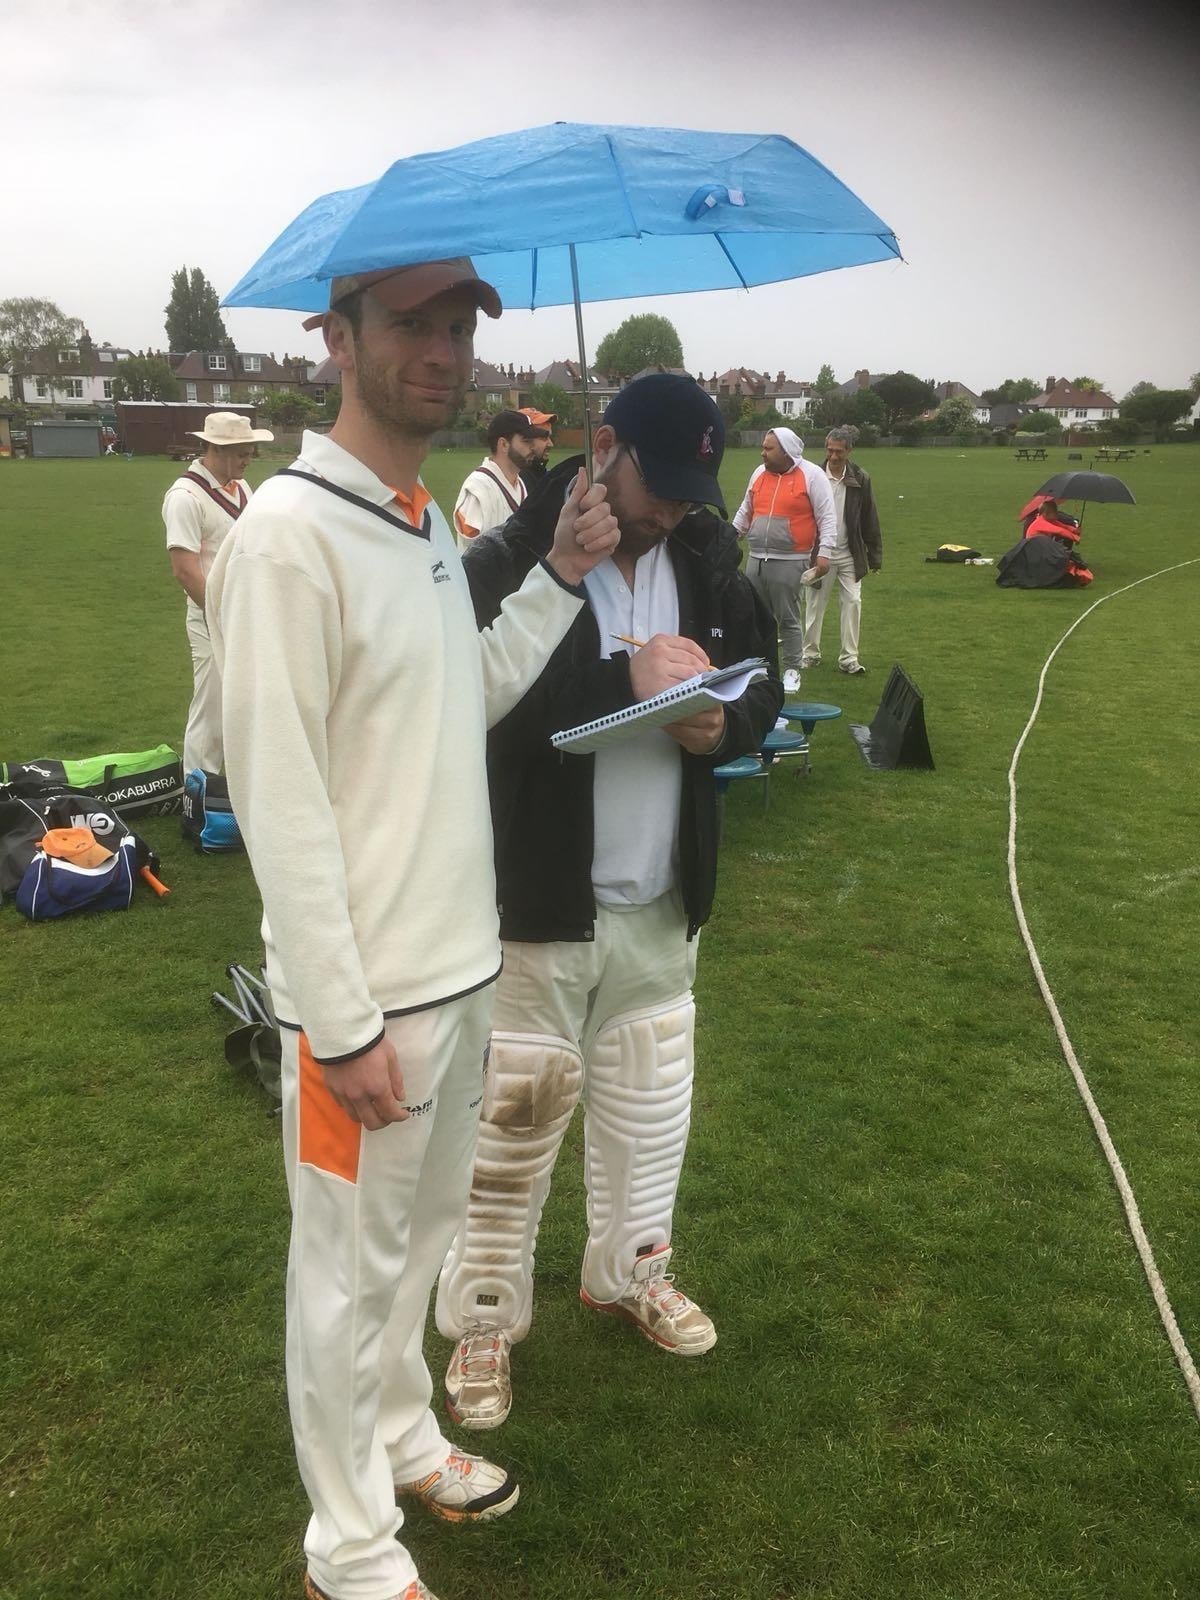 MATCH REPORT: Wet, Wet, Wet! But there is no Sweet Little Mystery bowler for The Road as South Bank reign in the rain